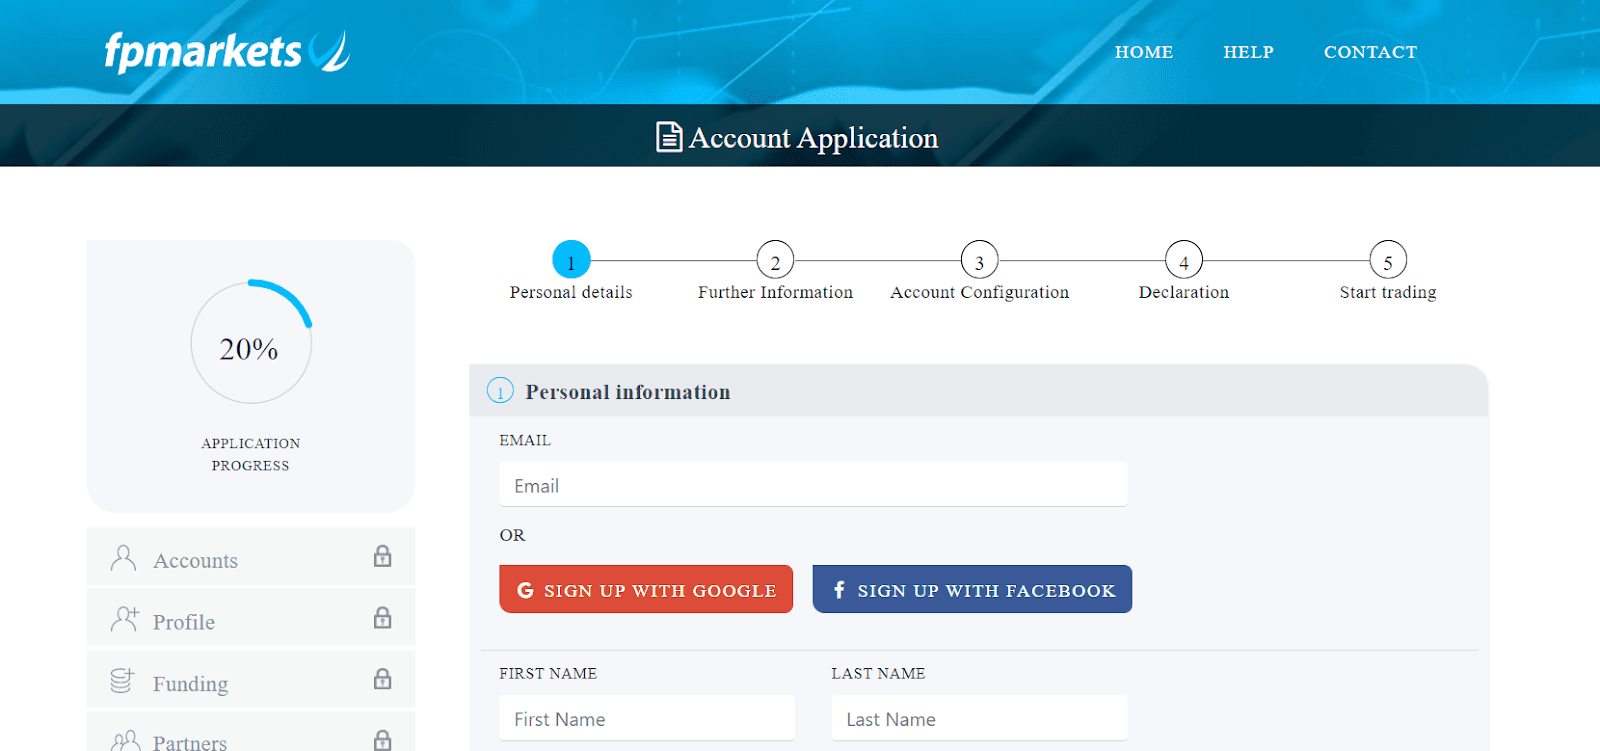 Review of FP Markets’ User Account — Open the account